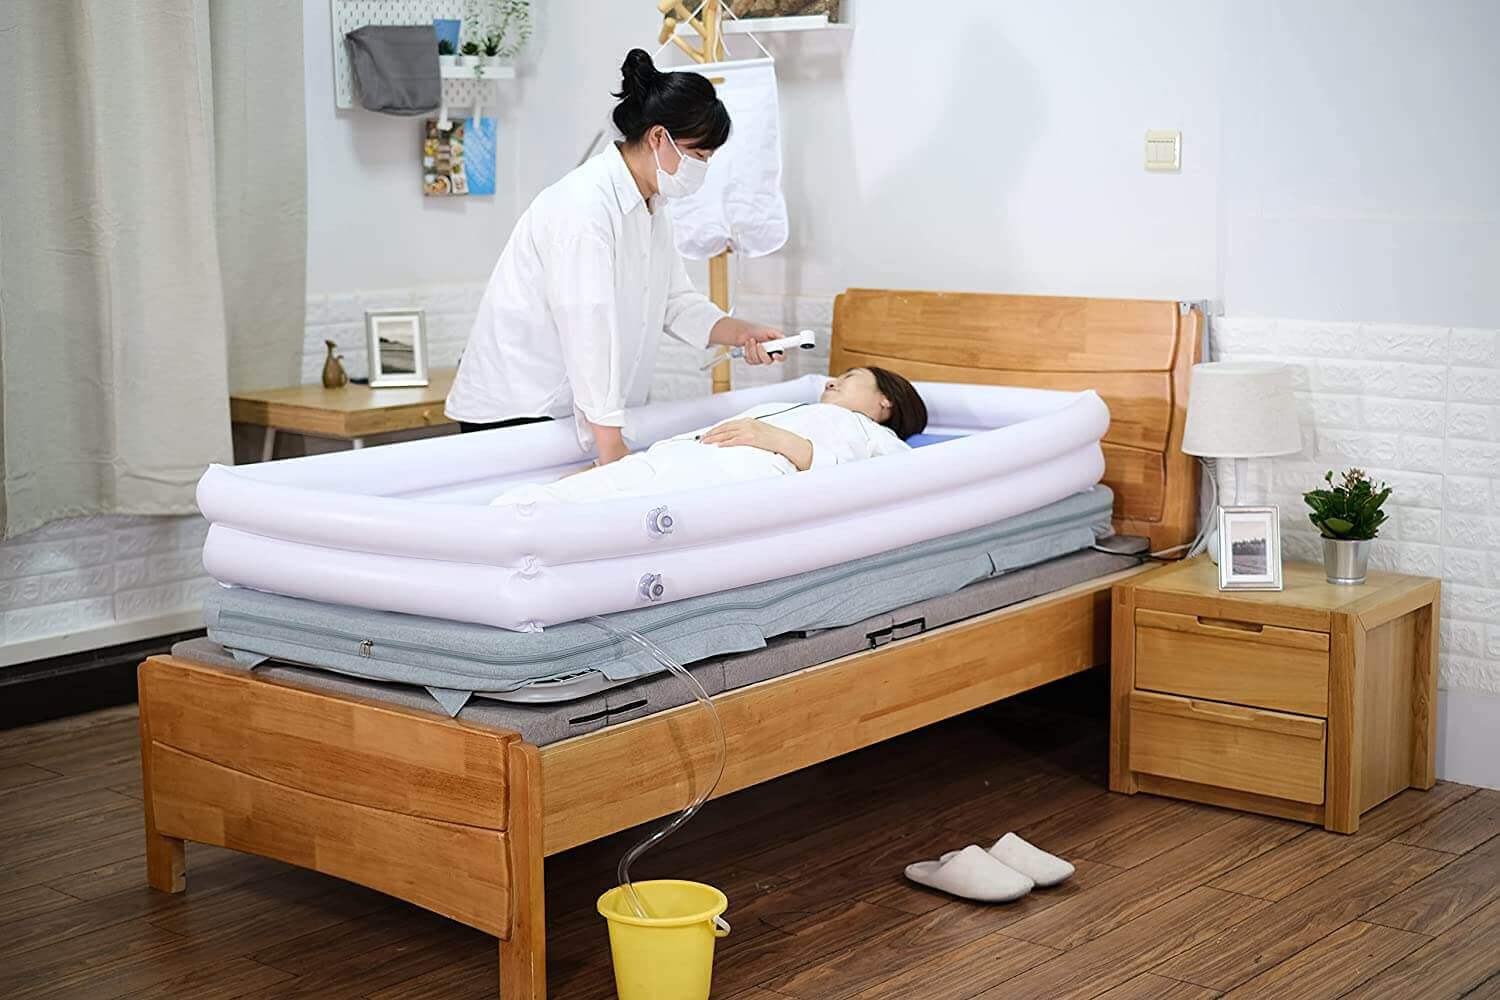 Manual Inflatable Bathtub for Bath Aids, one is taking care of the other use the bathtub